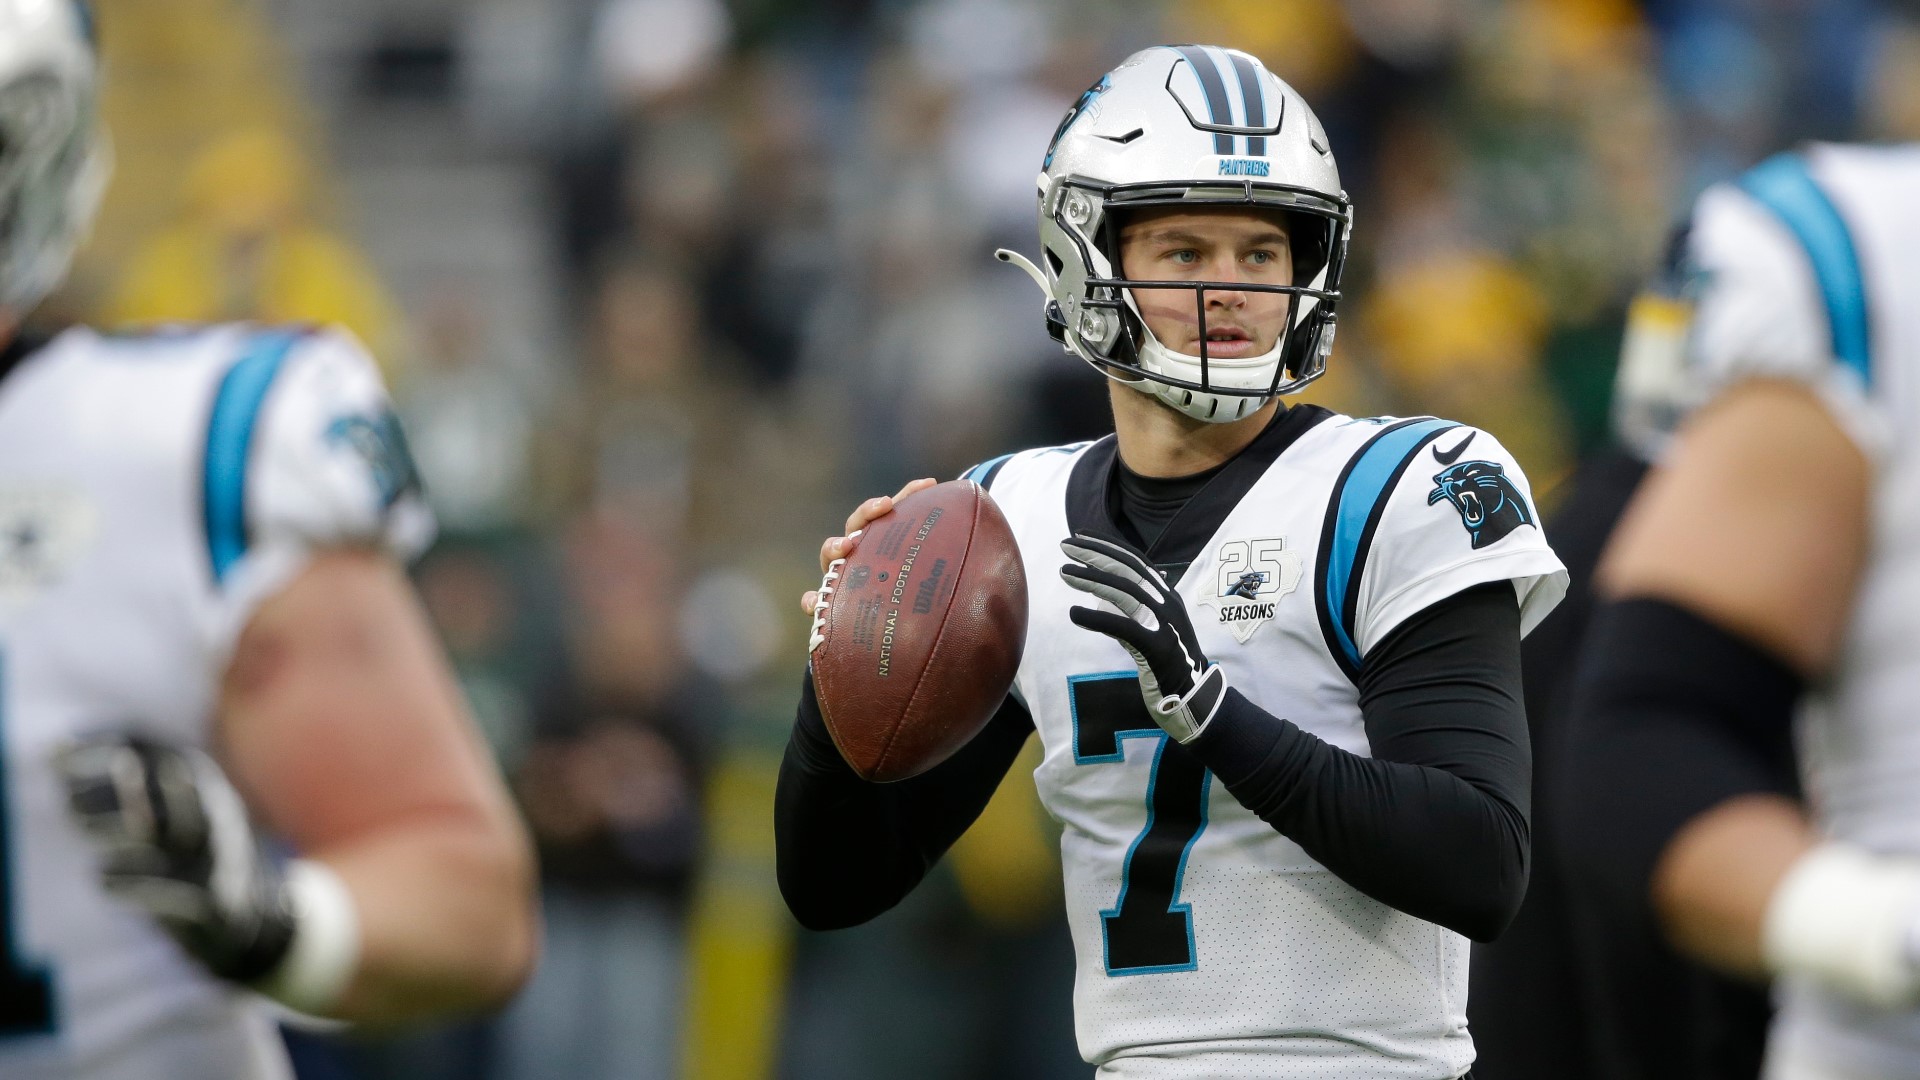 Kyle Allen threw for over 300 yards in Sunday's loss to Green Bay, but he also had two costly turnovers. Eugene Robinson breaks it down with Ashley Stroehlein.